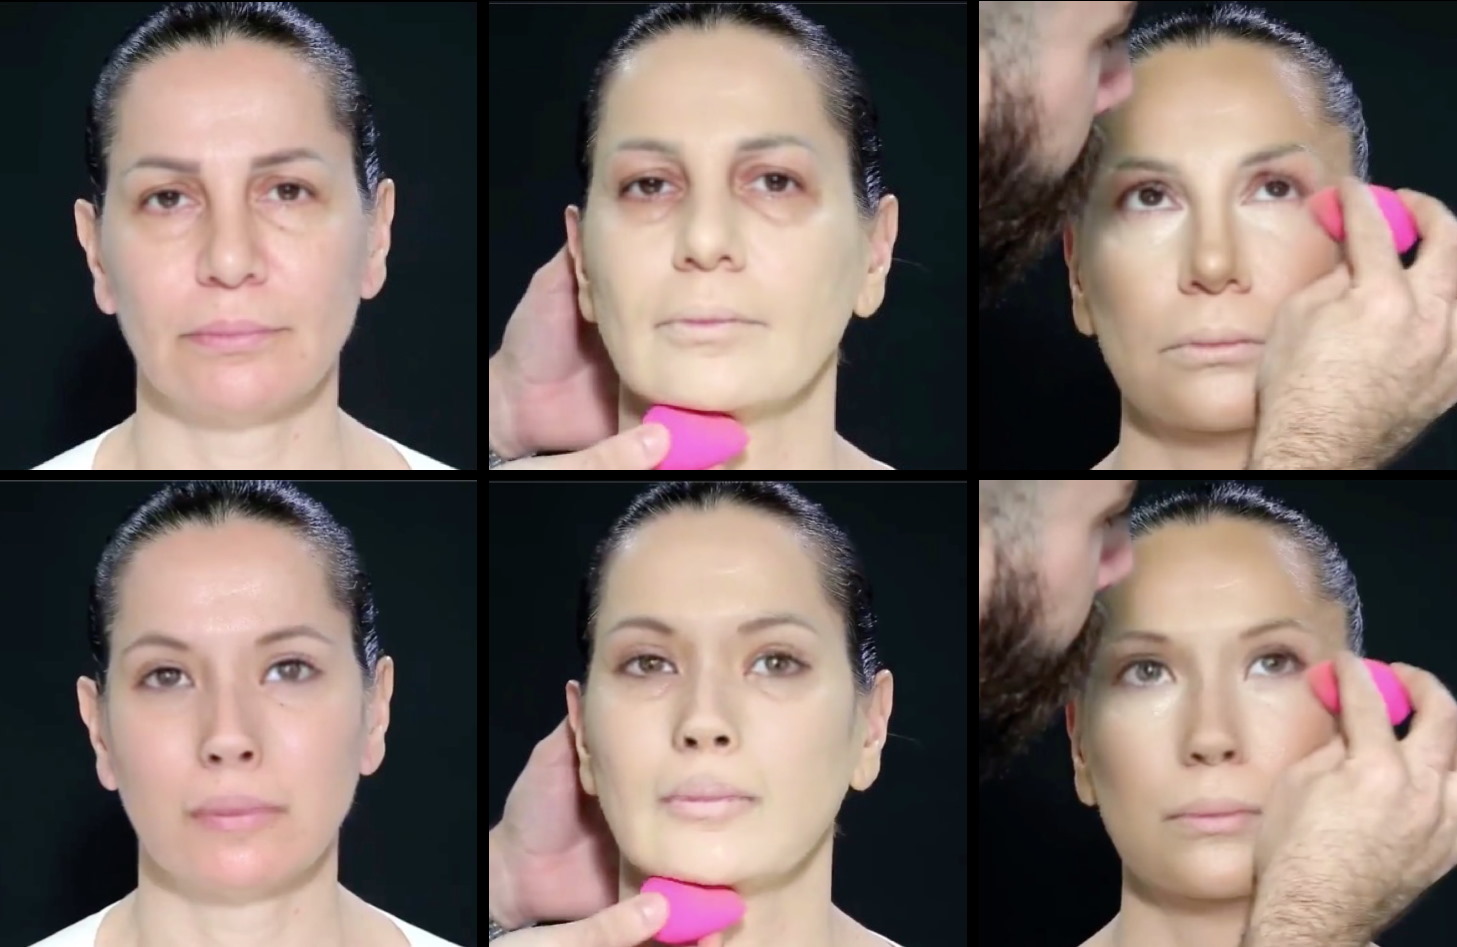 facebook machine learning aims to modify faces hands and outfits